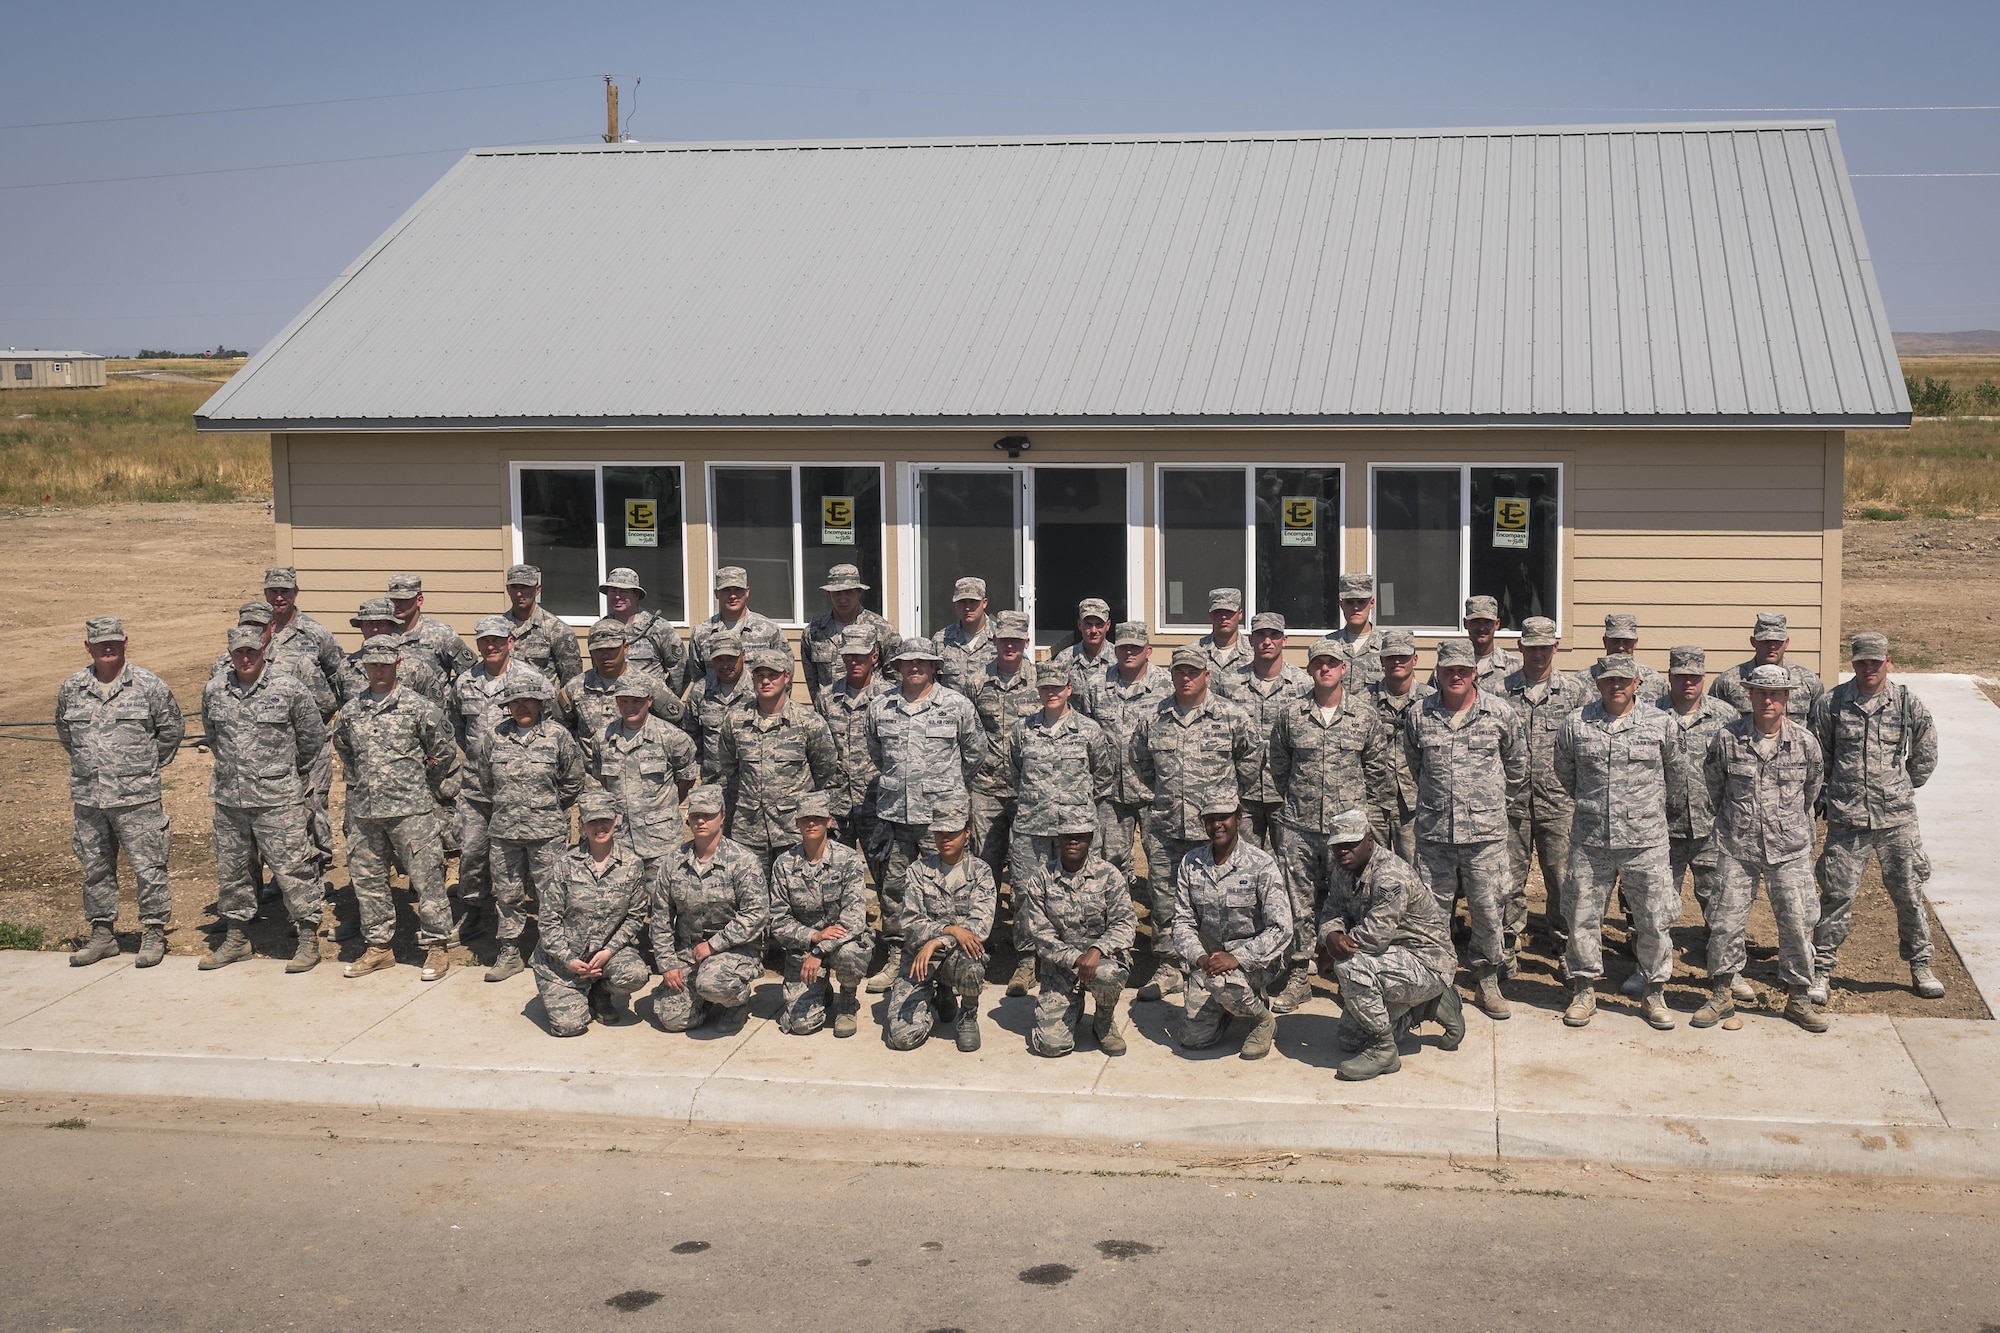 Airmen and soldiers with U.S. National Guard pose for a group photo in Crow Agency, Mont., Aug. 4, 2017. The Illinois Air National Guard’s 182nd Civil Engineer Squadron, augmented by 182nd Force Support Squadron services specialists, 182nd Medical Group medics and soldiers with the Montana Army National Guard’s 230th Vertical Engineer Company, helped build homes for Crow Nation veterans as part of the Department of Defense’s Innovative Readiness Training civil-military relations program. (U.S. Air National Guard photo by Tech. Sgt. Lealan Buehrer)